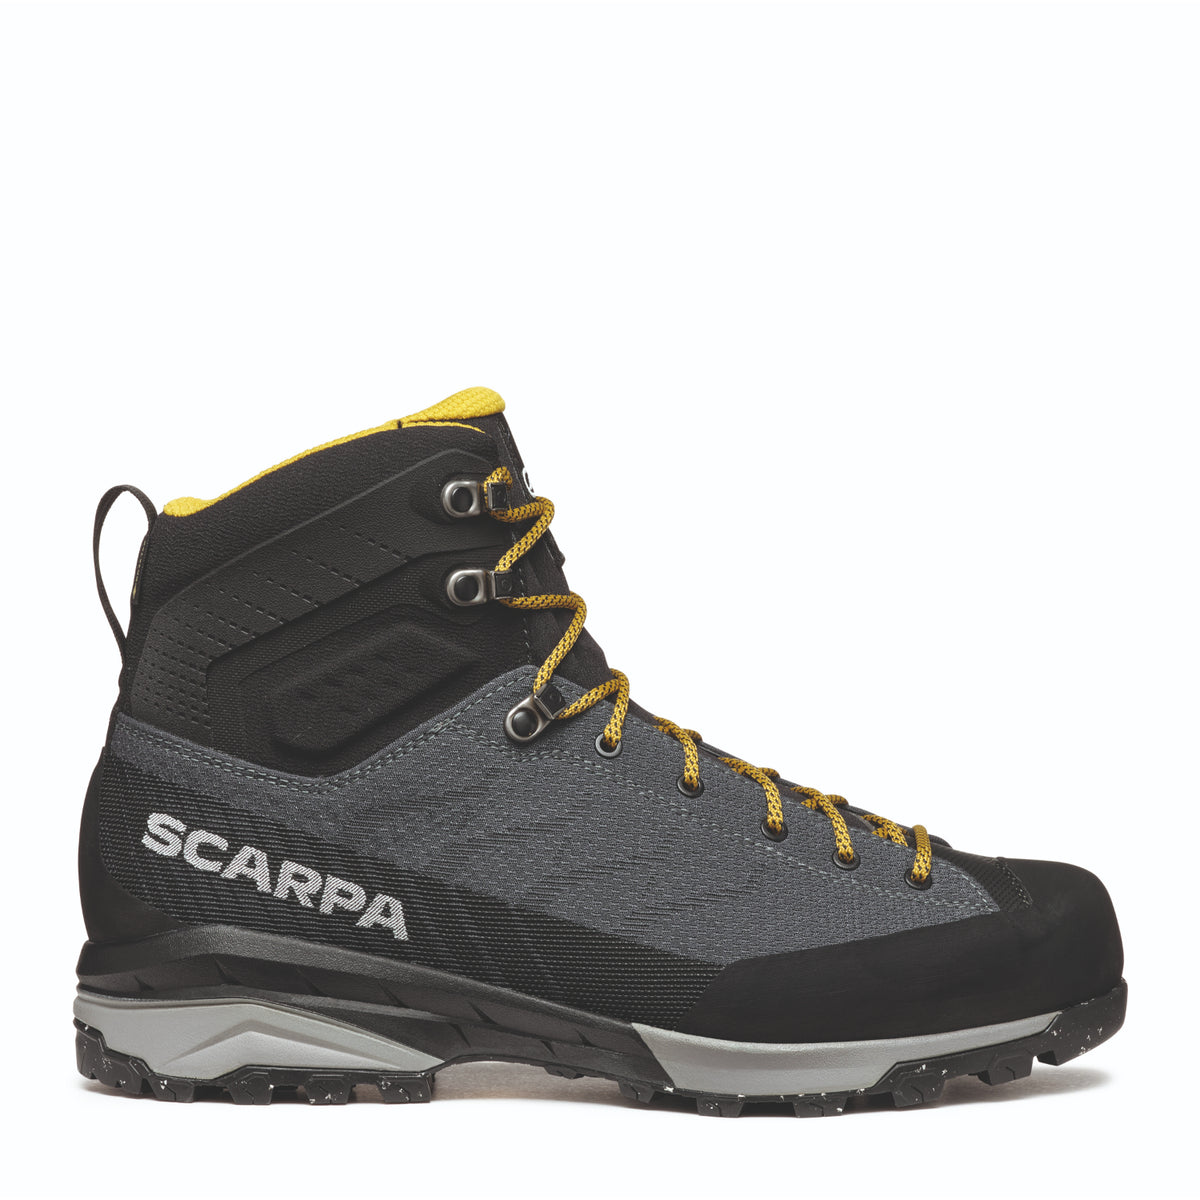 Scarpa Mescalito TRK Planet GTX in grey/curry. side view showing logo